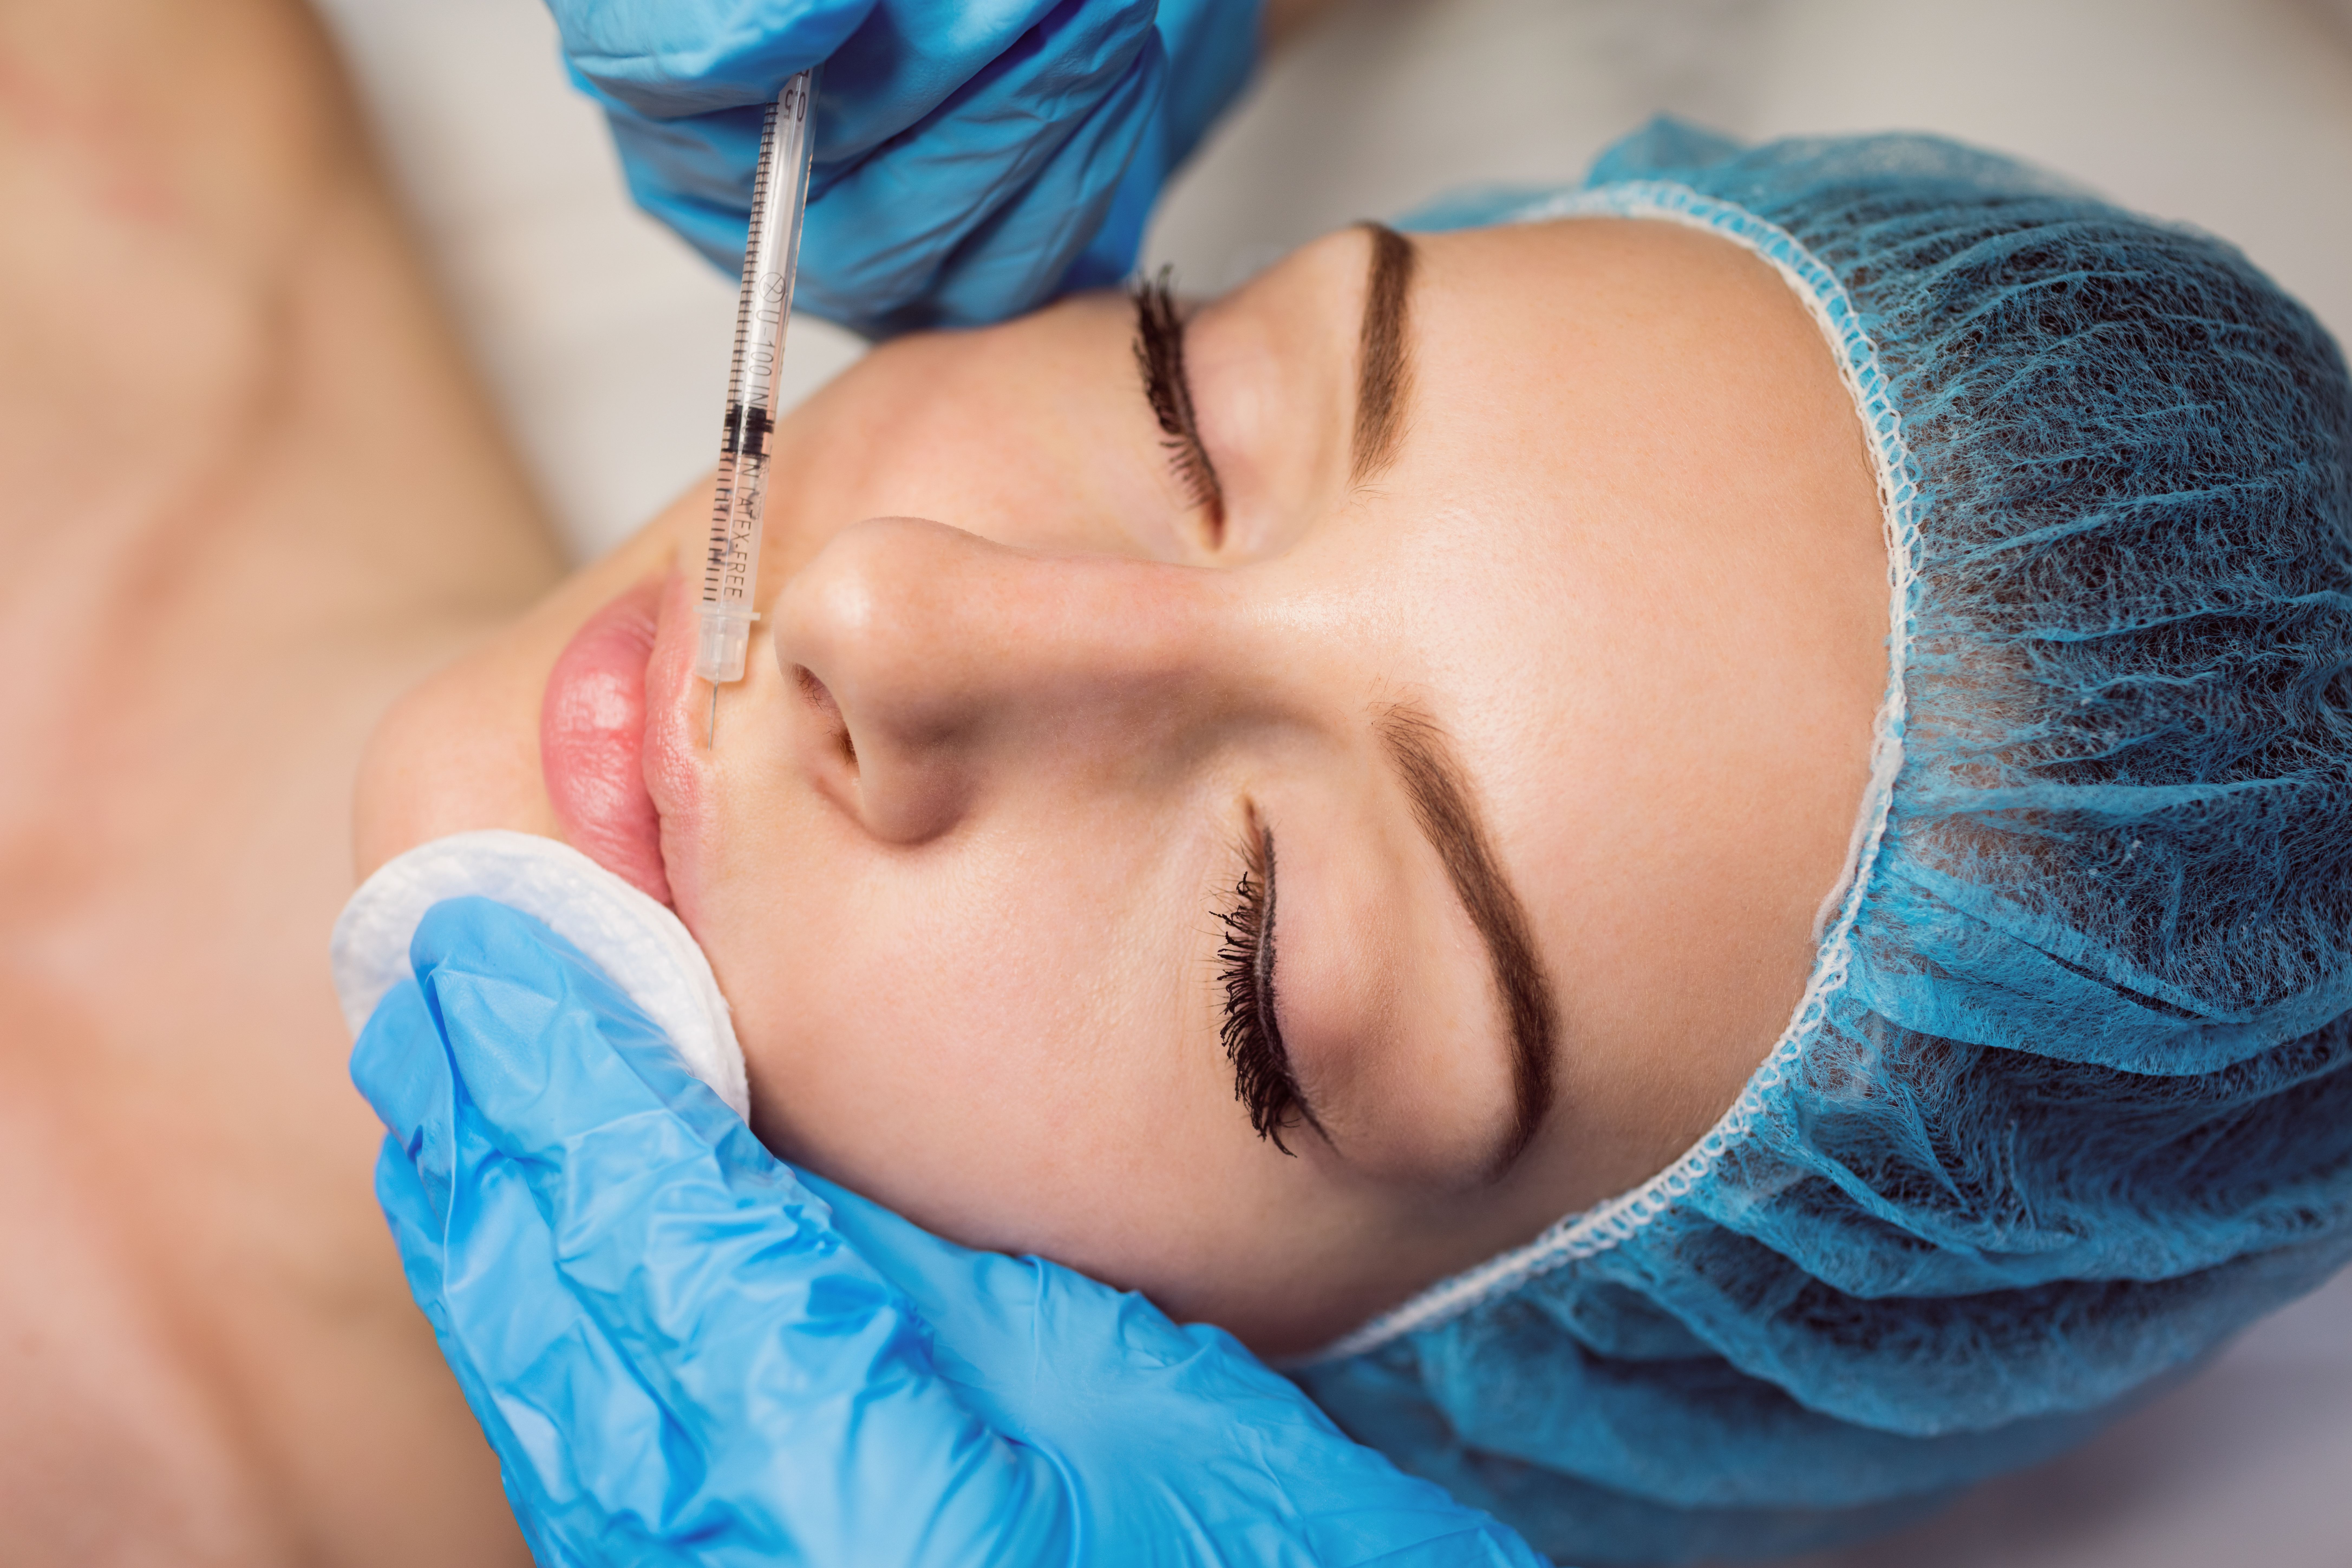 Dermal Fillers in Singapore: All You Need to Know